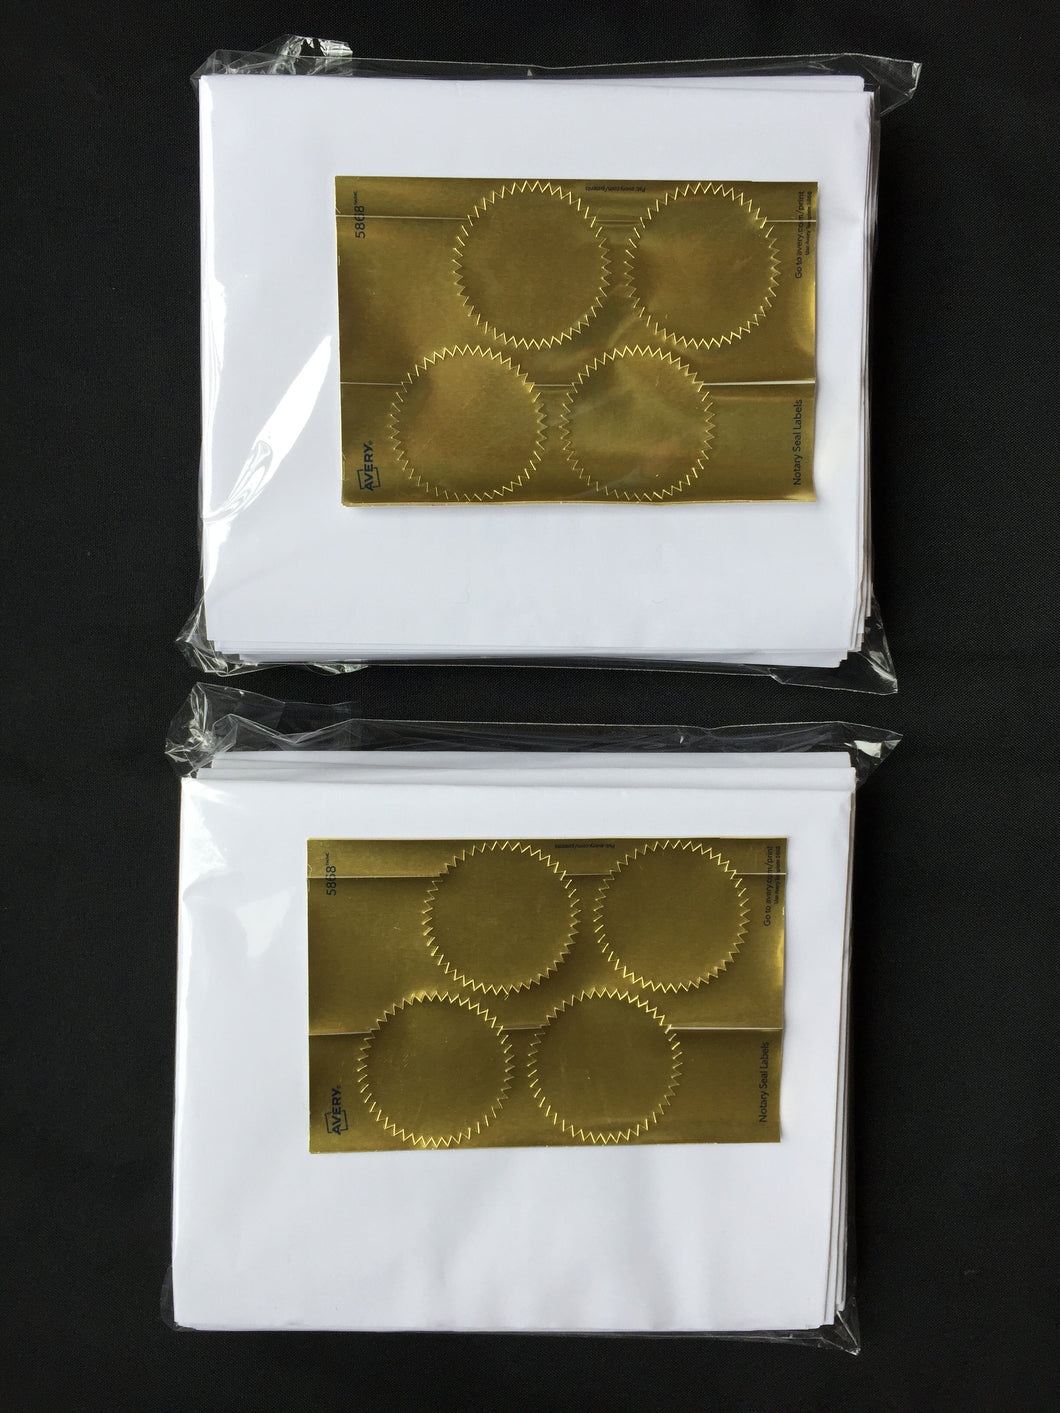 24 x Nobrainer Prediction Papers with Gold Seals